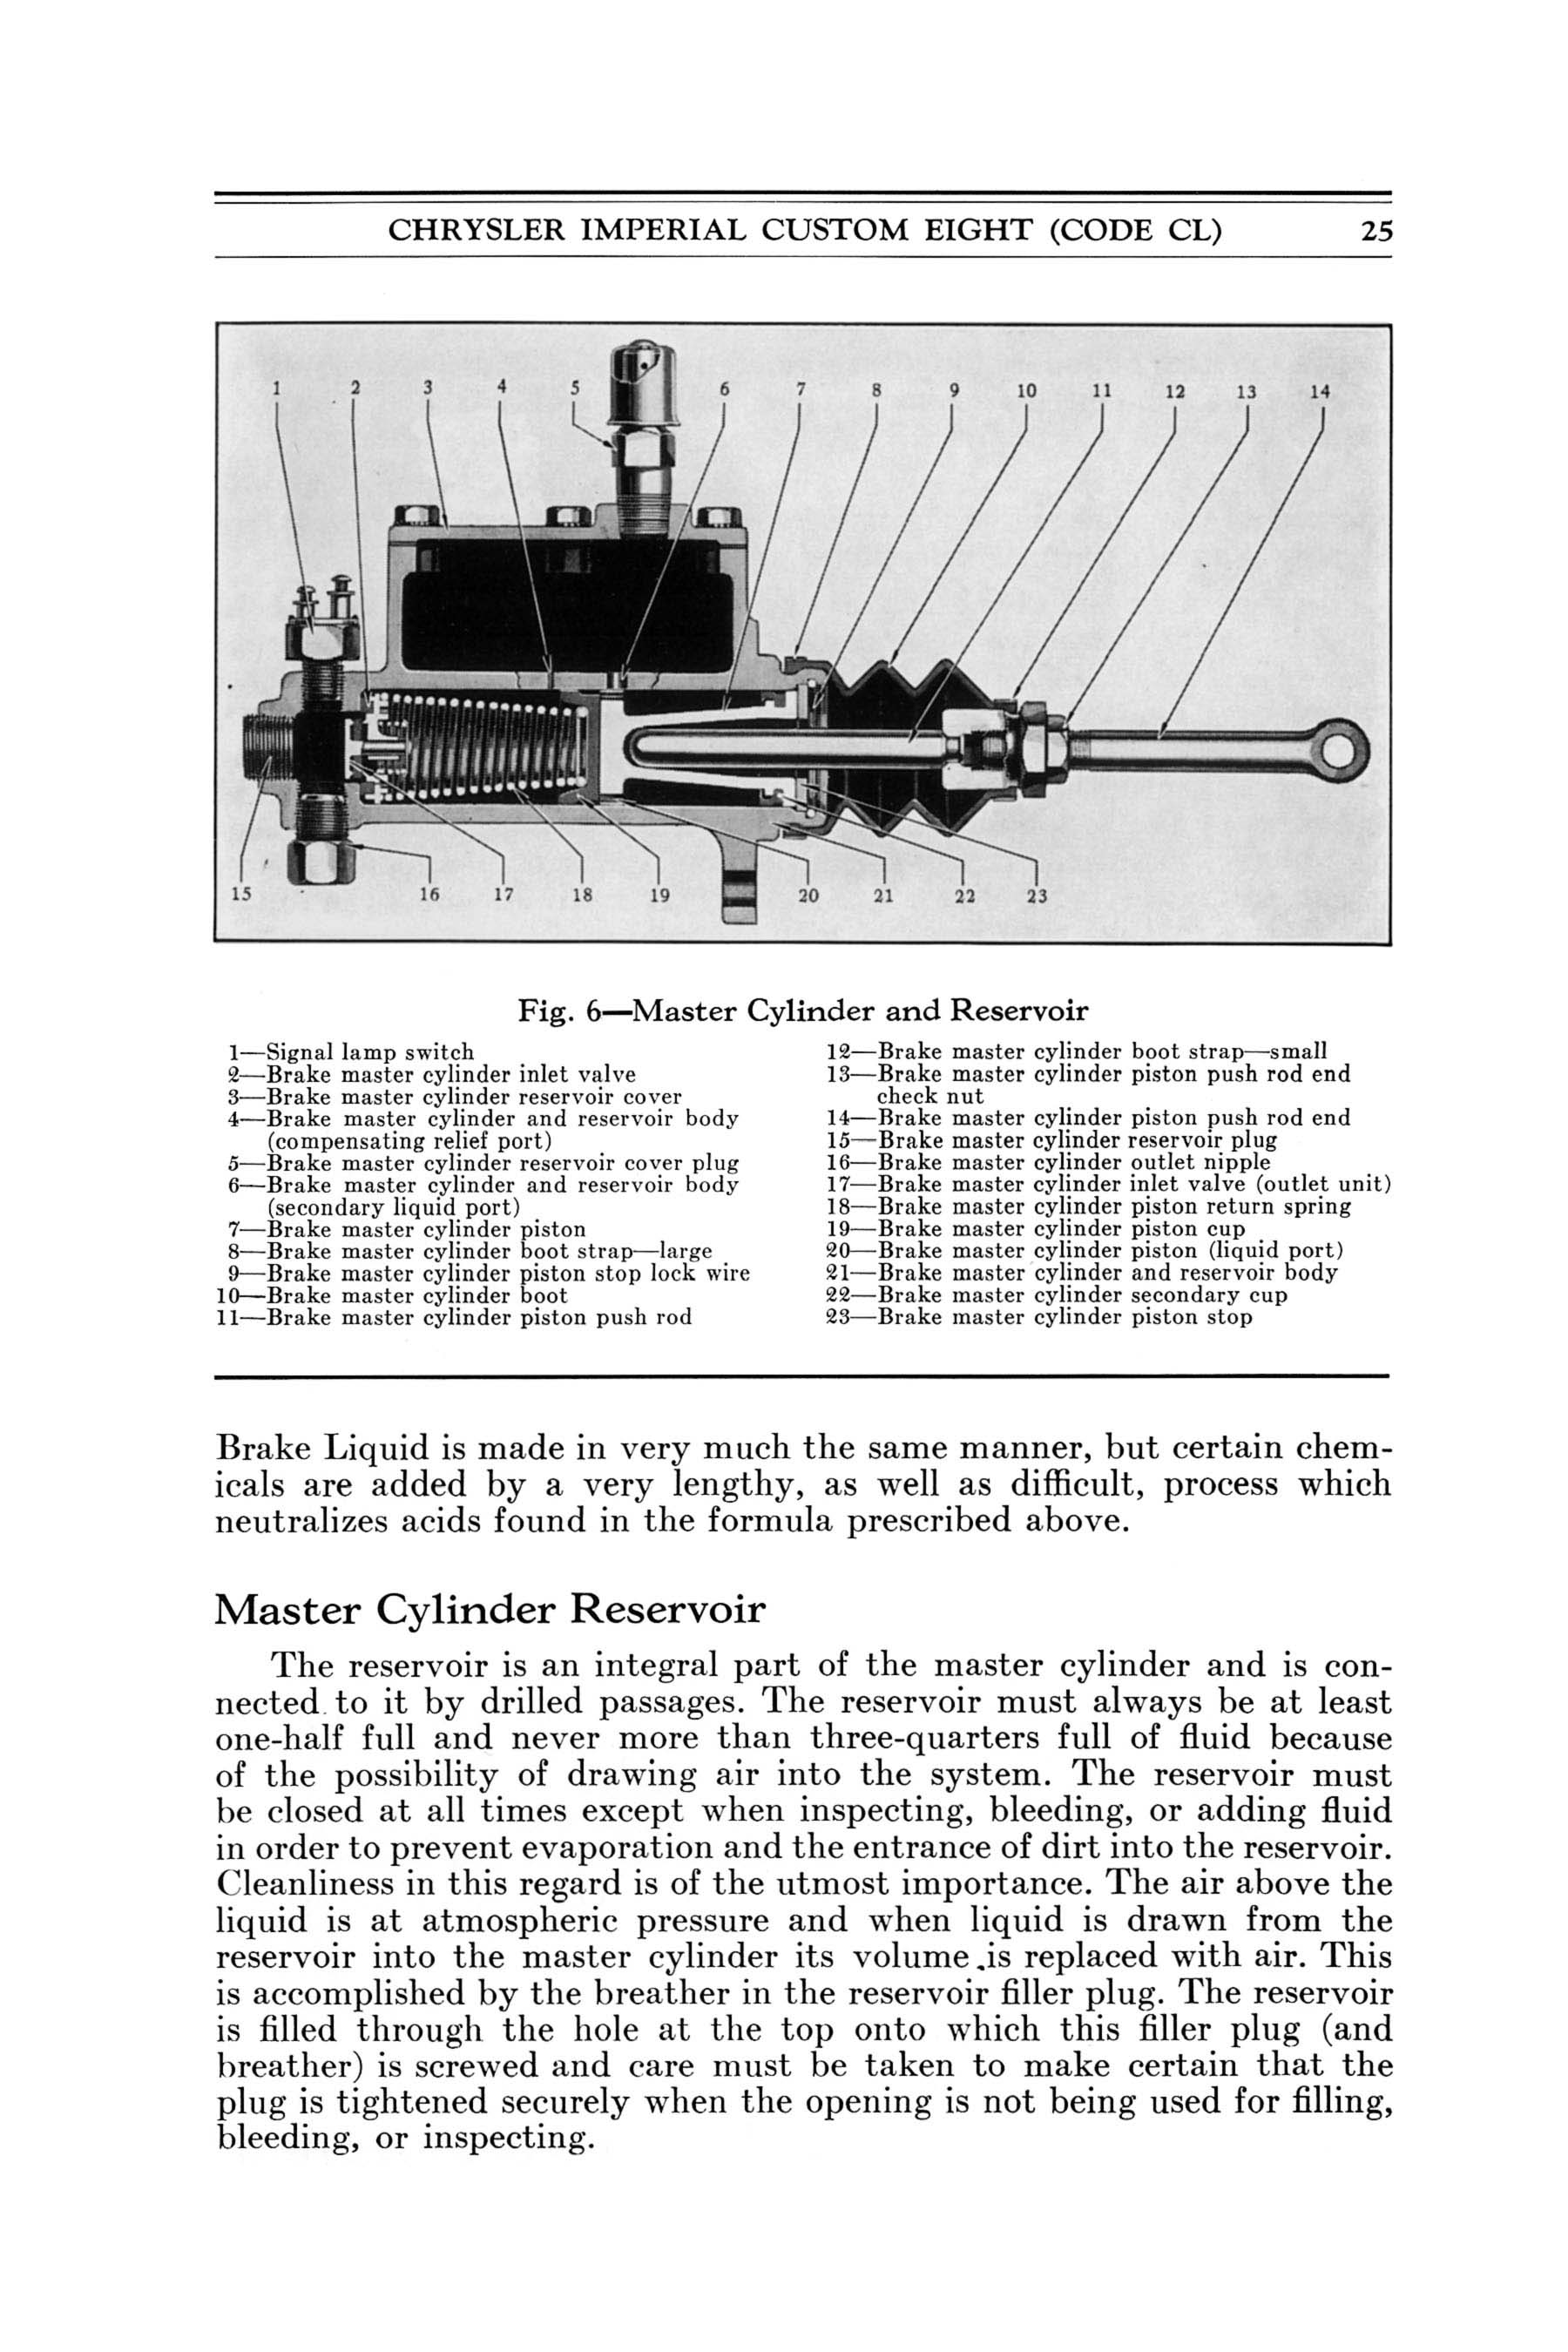 1932 Chrysler Imperial Instruction Book Page 40